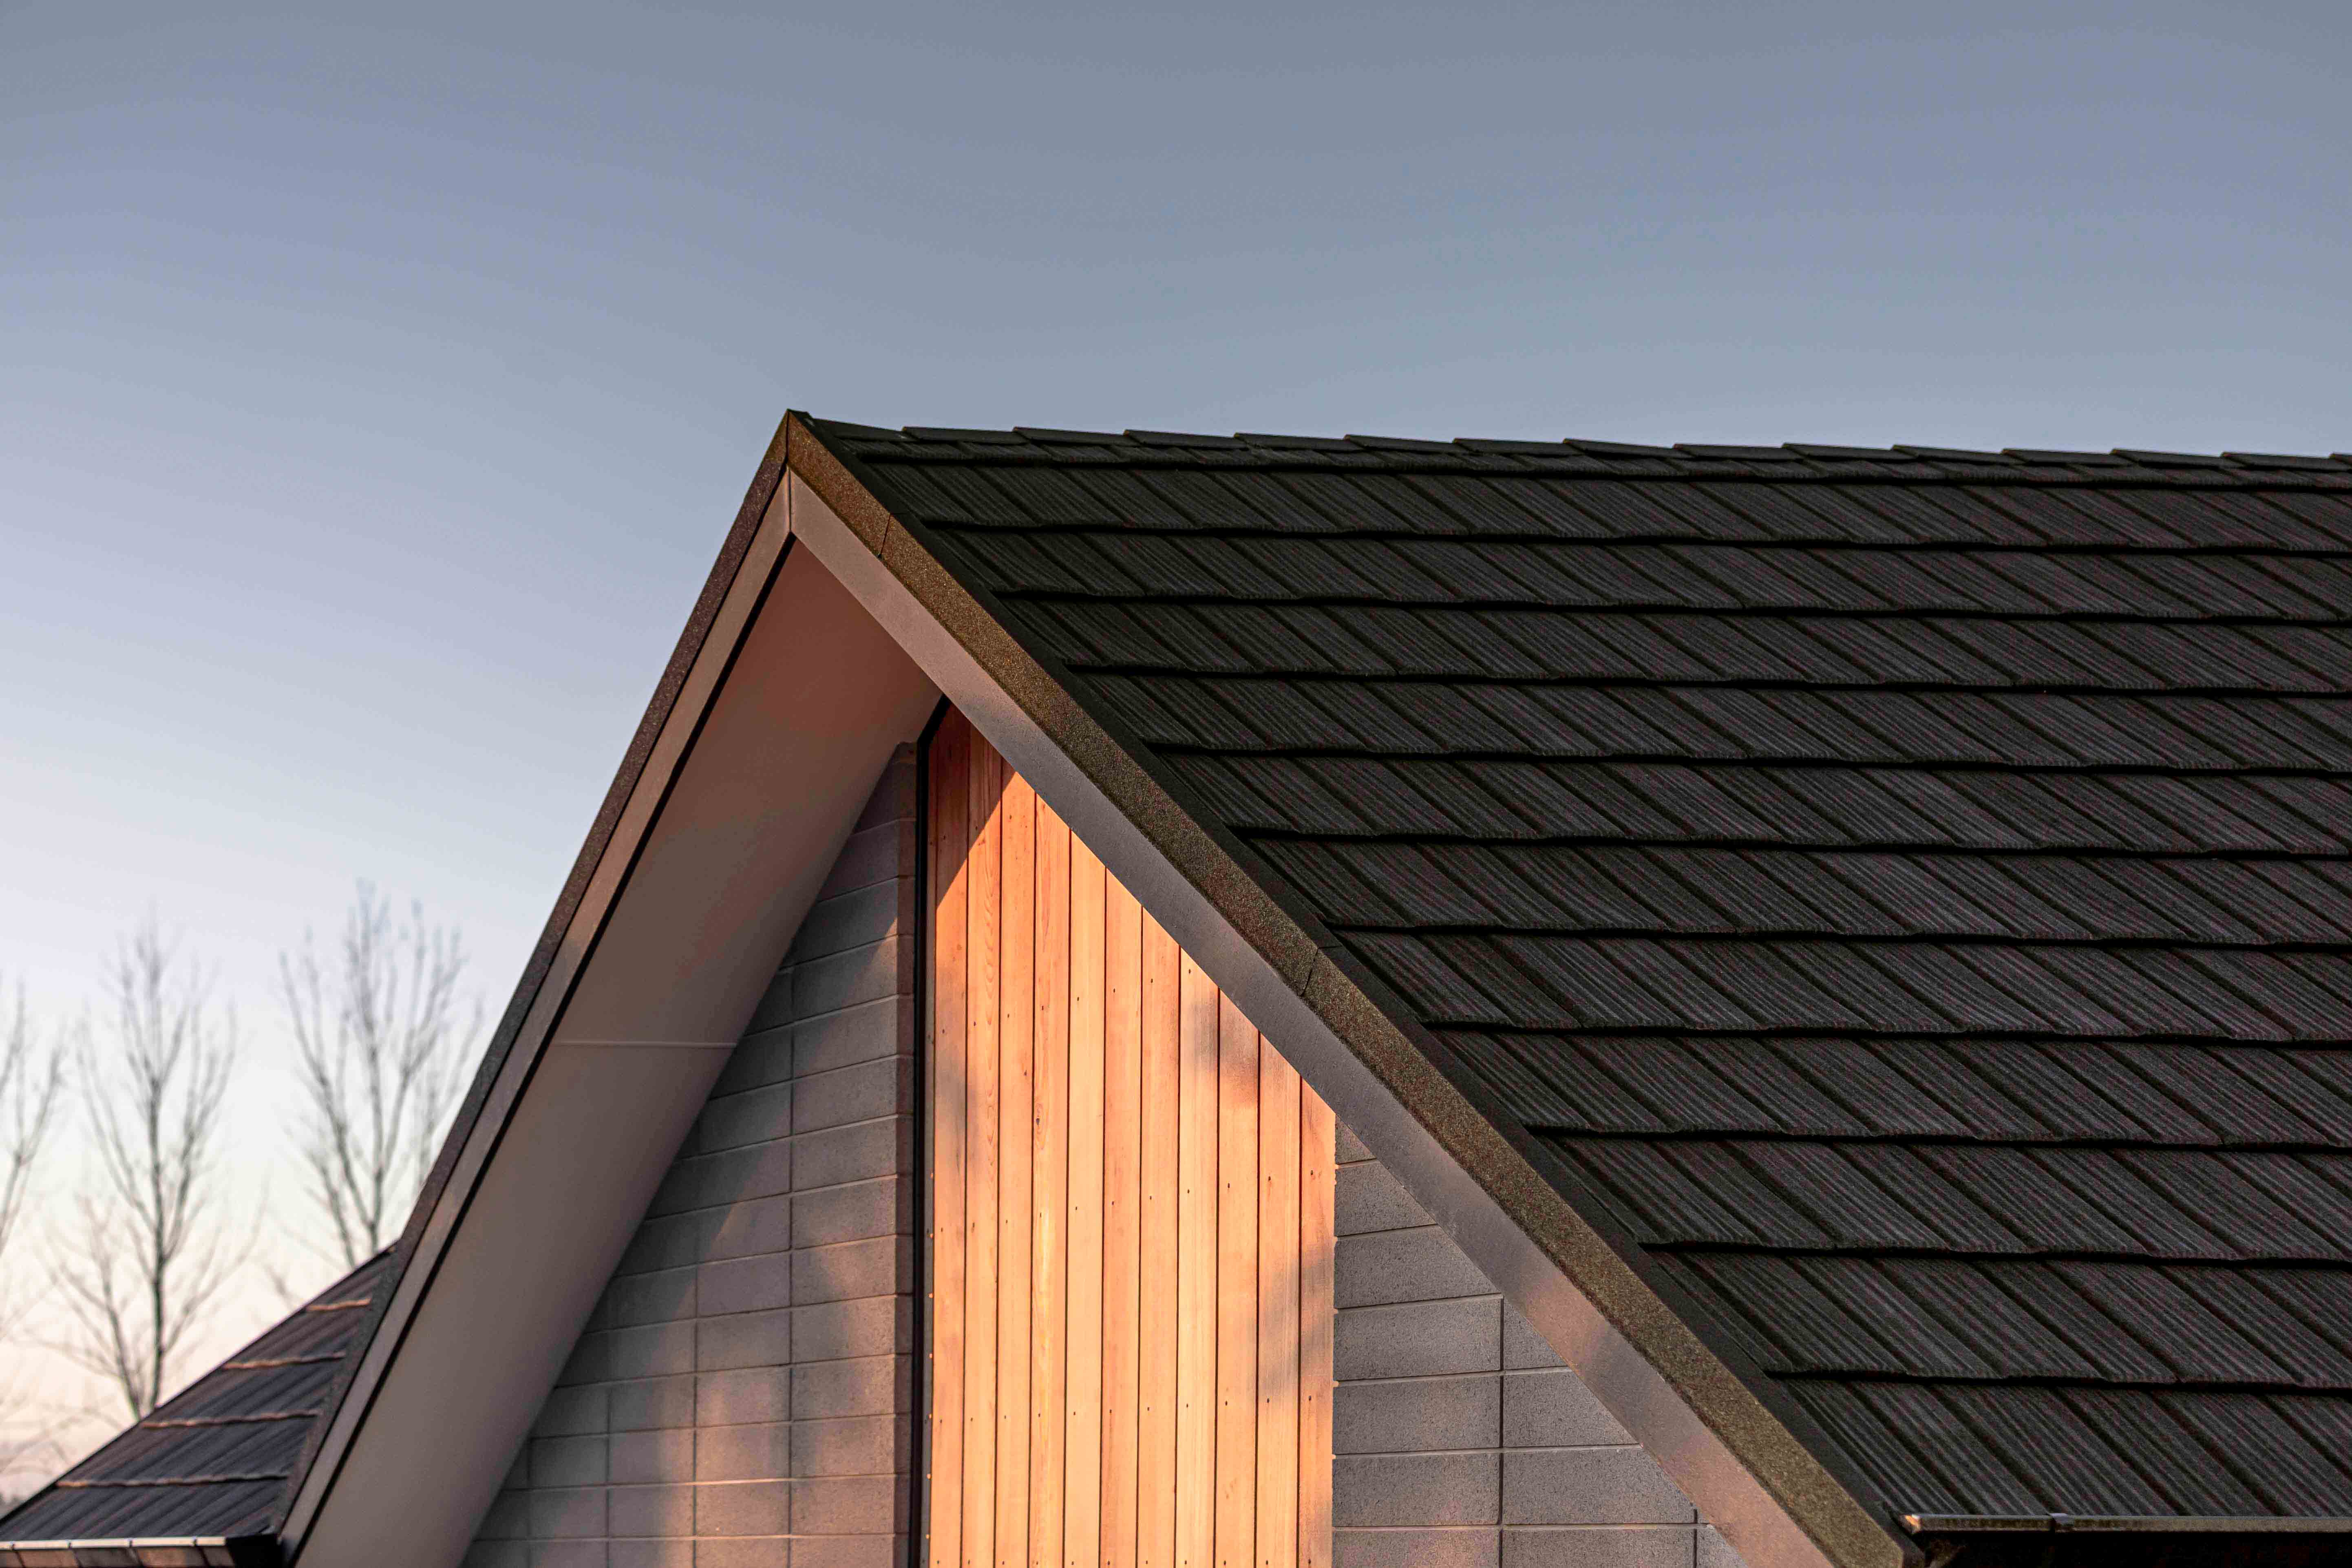 CF Shake, Charcoal Blend, New Build, New Roof, Architecturally Designed, Close Up, Cedar Cladding